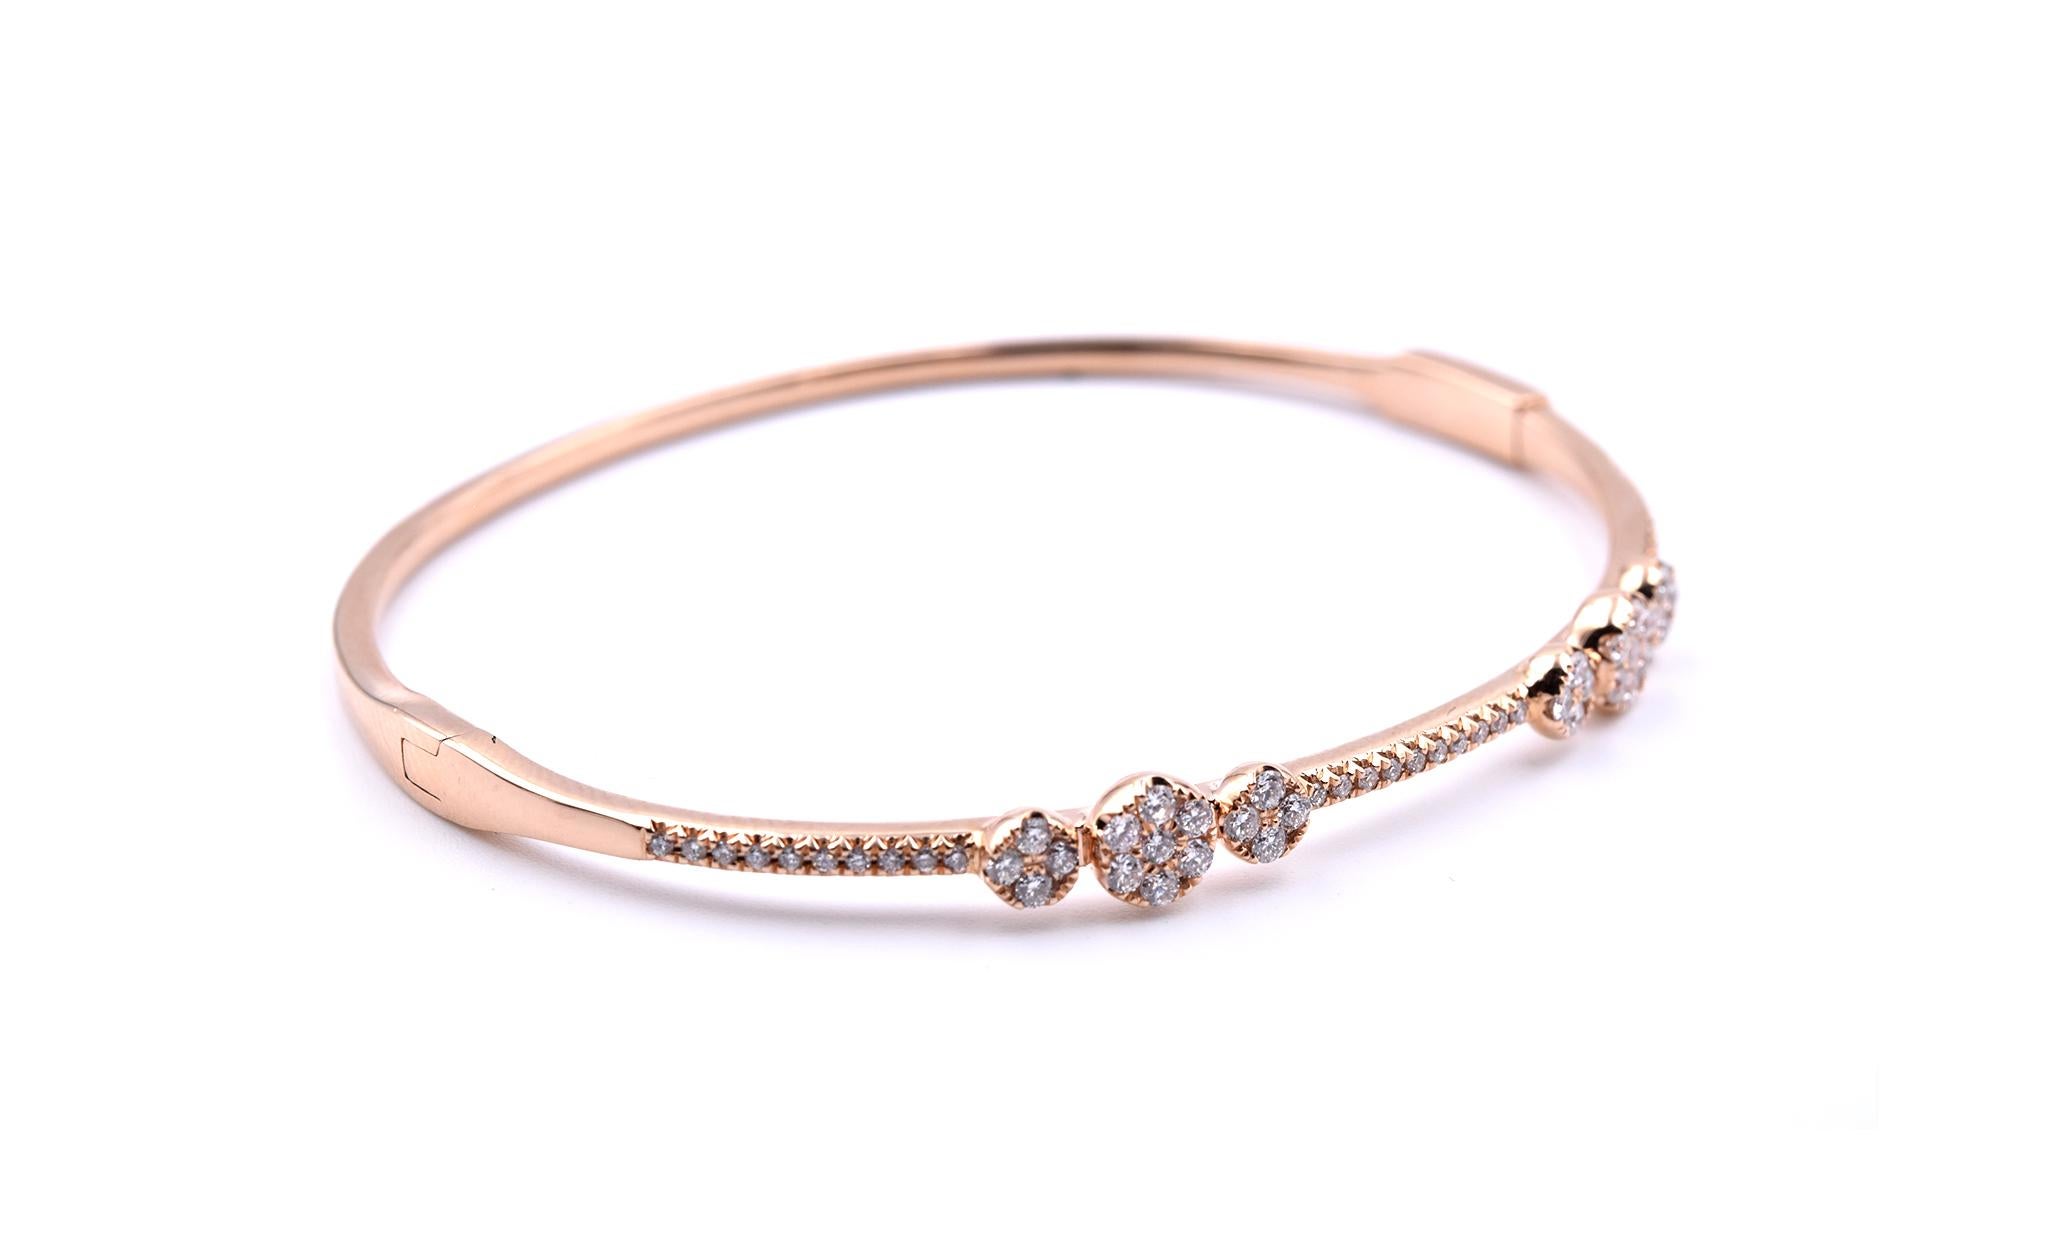 Designer: custom design
Material: 18k rose gold
Diamonds: 60 round brilliant cut= .70cttw
Color: H
Clarity: SI1
Dimensions: bracelet will fit a size 7-inch wrist, bracelet is 2.00mm-5.63mm wide
Weight: 11.38 grams
